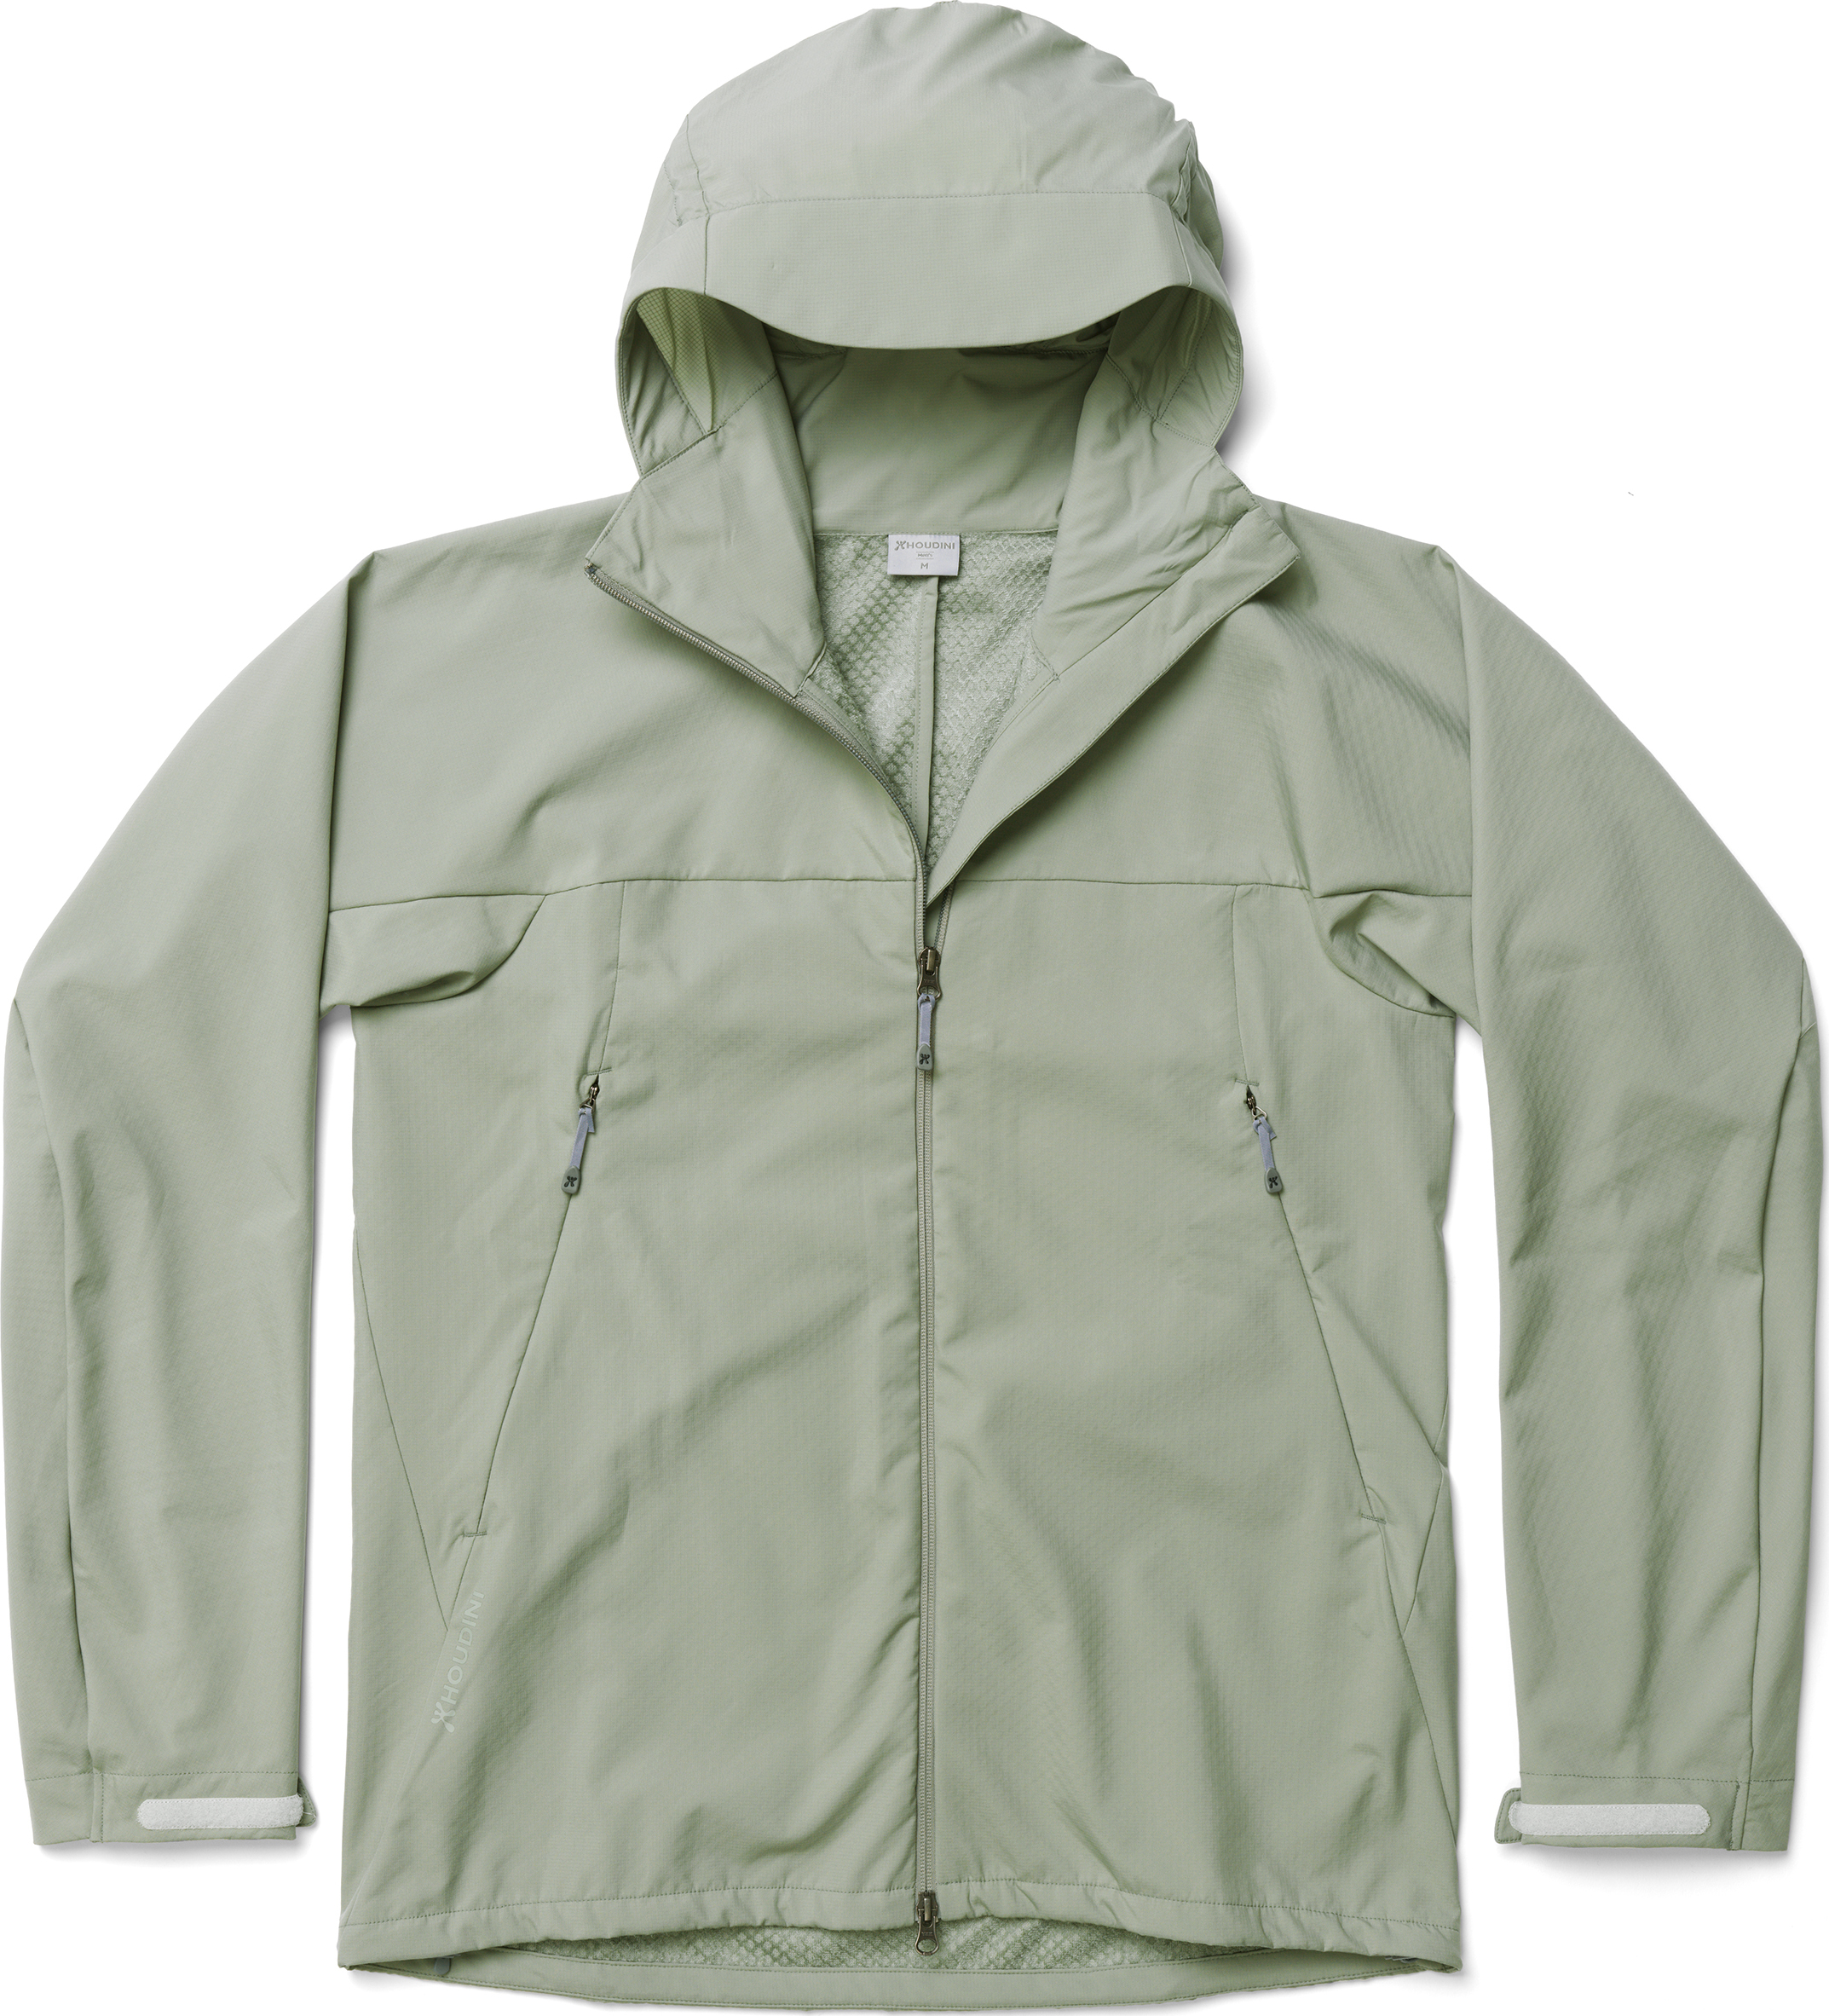 Houdini Men’s Pace Jacket Frost Green